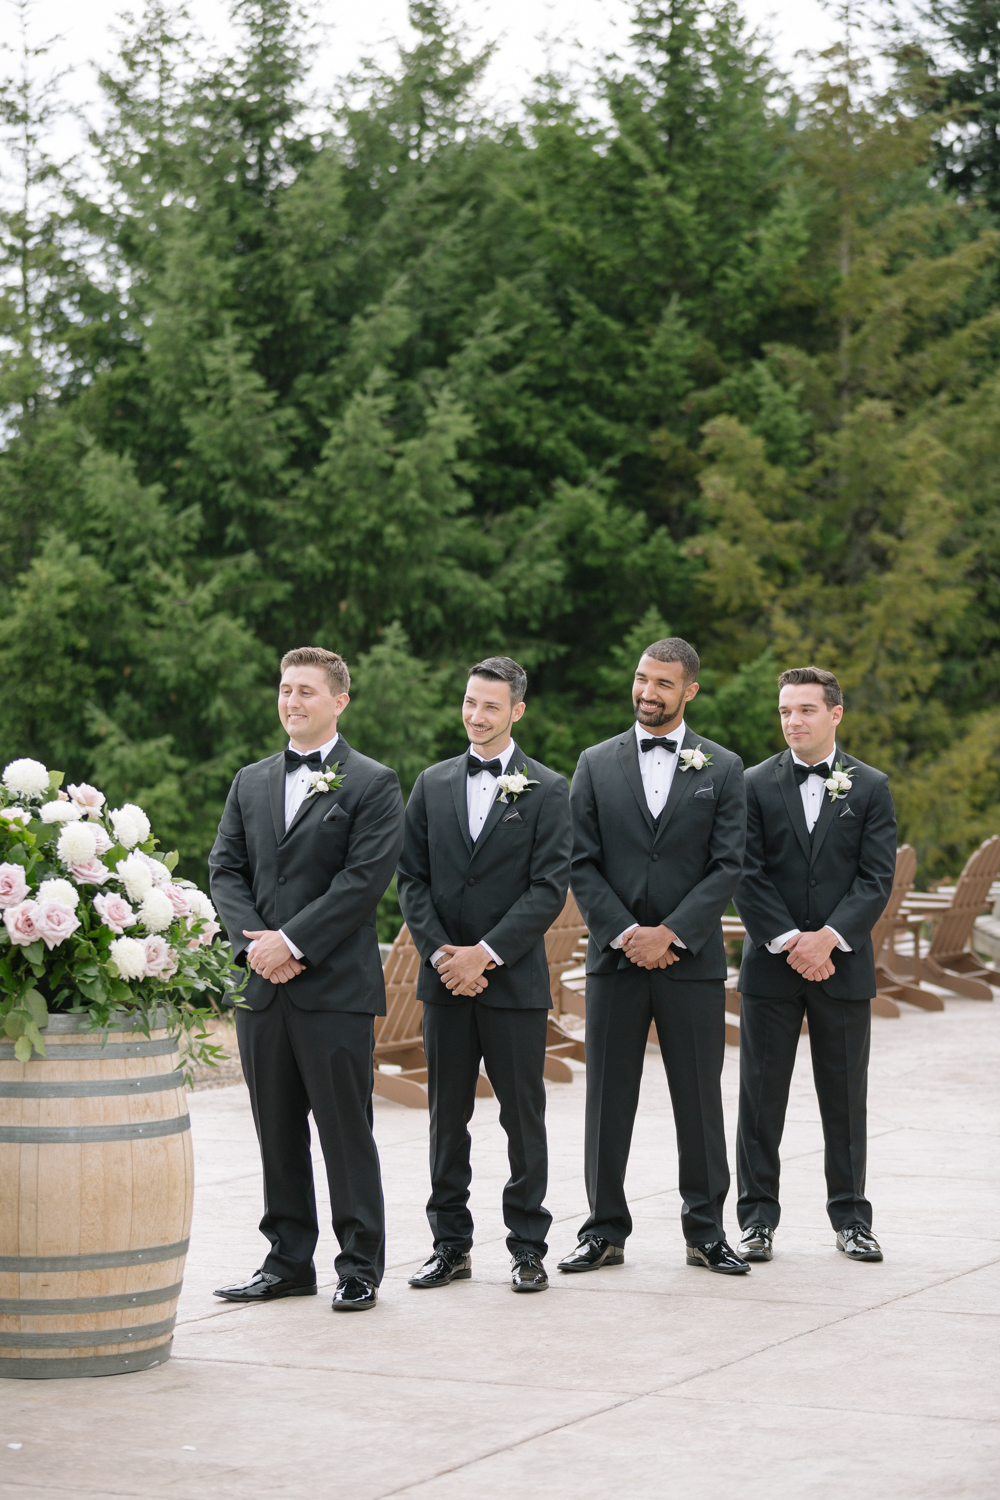 Youngberg Hill Vineyard Wedding in Wine Country Oregon - Corrie Mick Photography-294.jpg